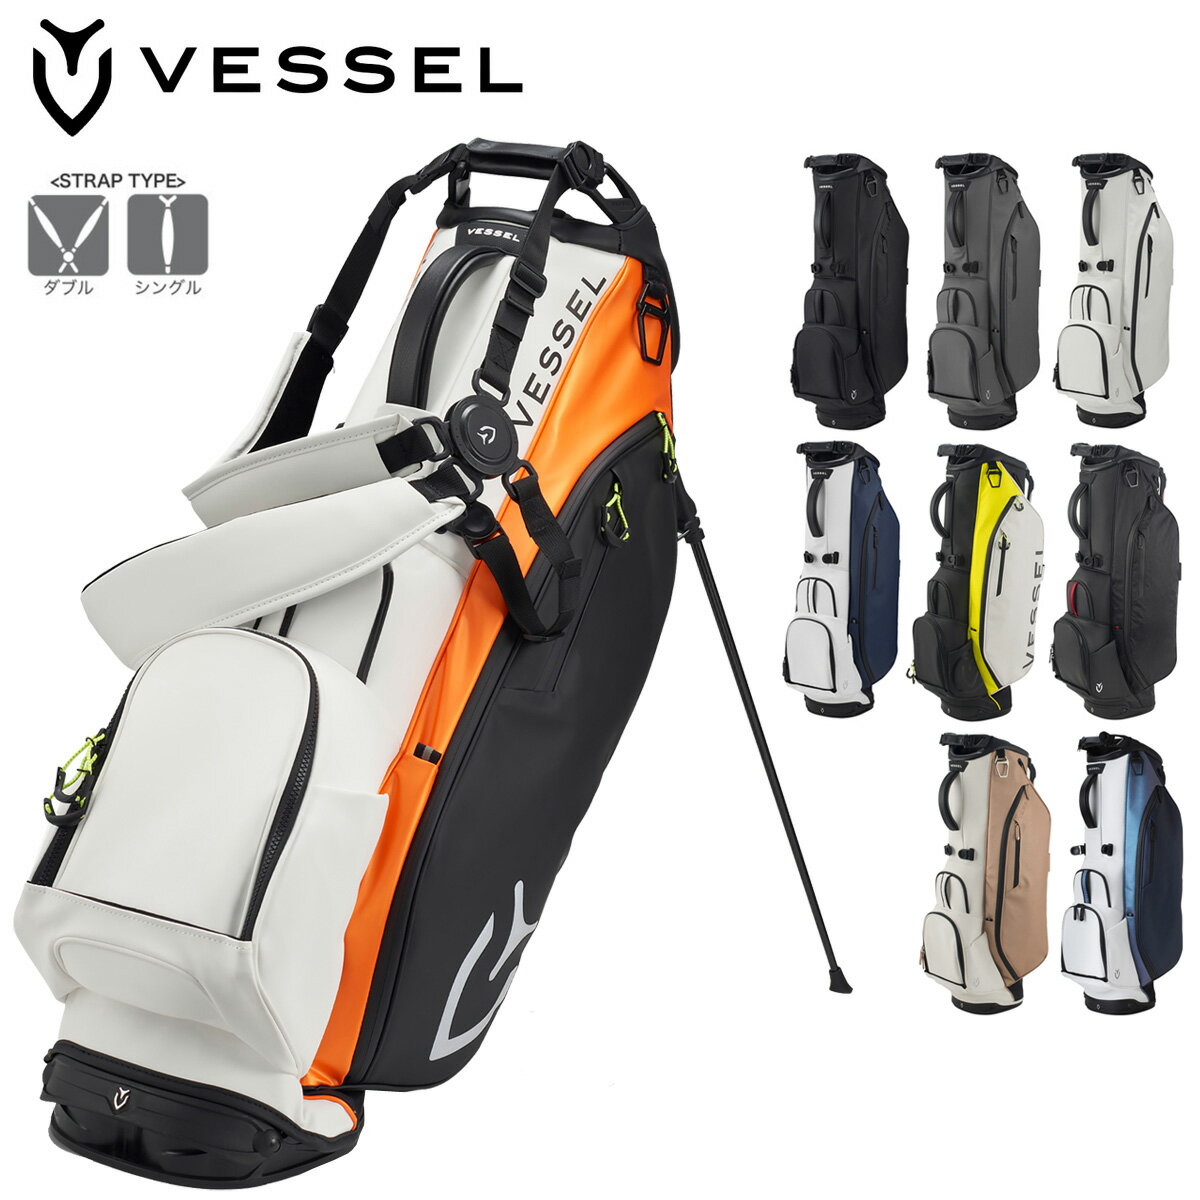 VESSEL <strong>ベゼル</strong>正規品 Player 3.0 Stand Bag スタンドバッグ <strong>キャディバッグ</strong> 「 8530120 」 【あす楽対応】